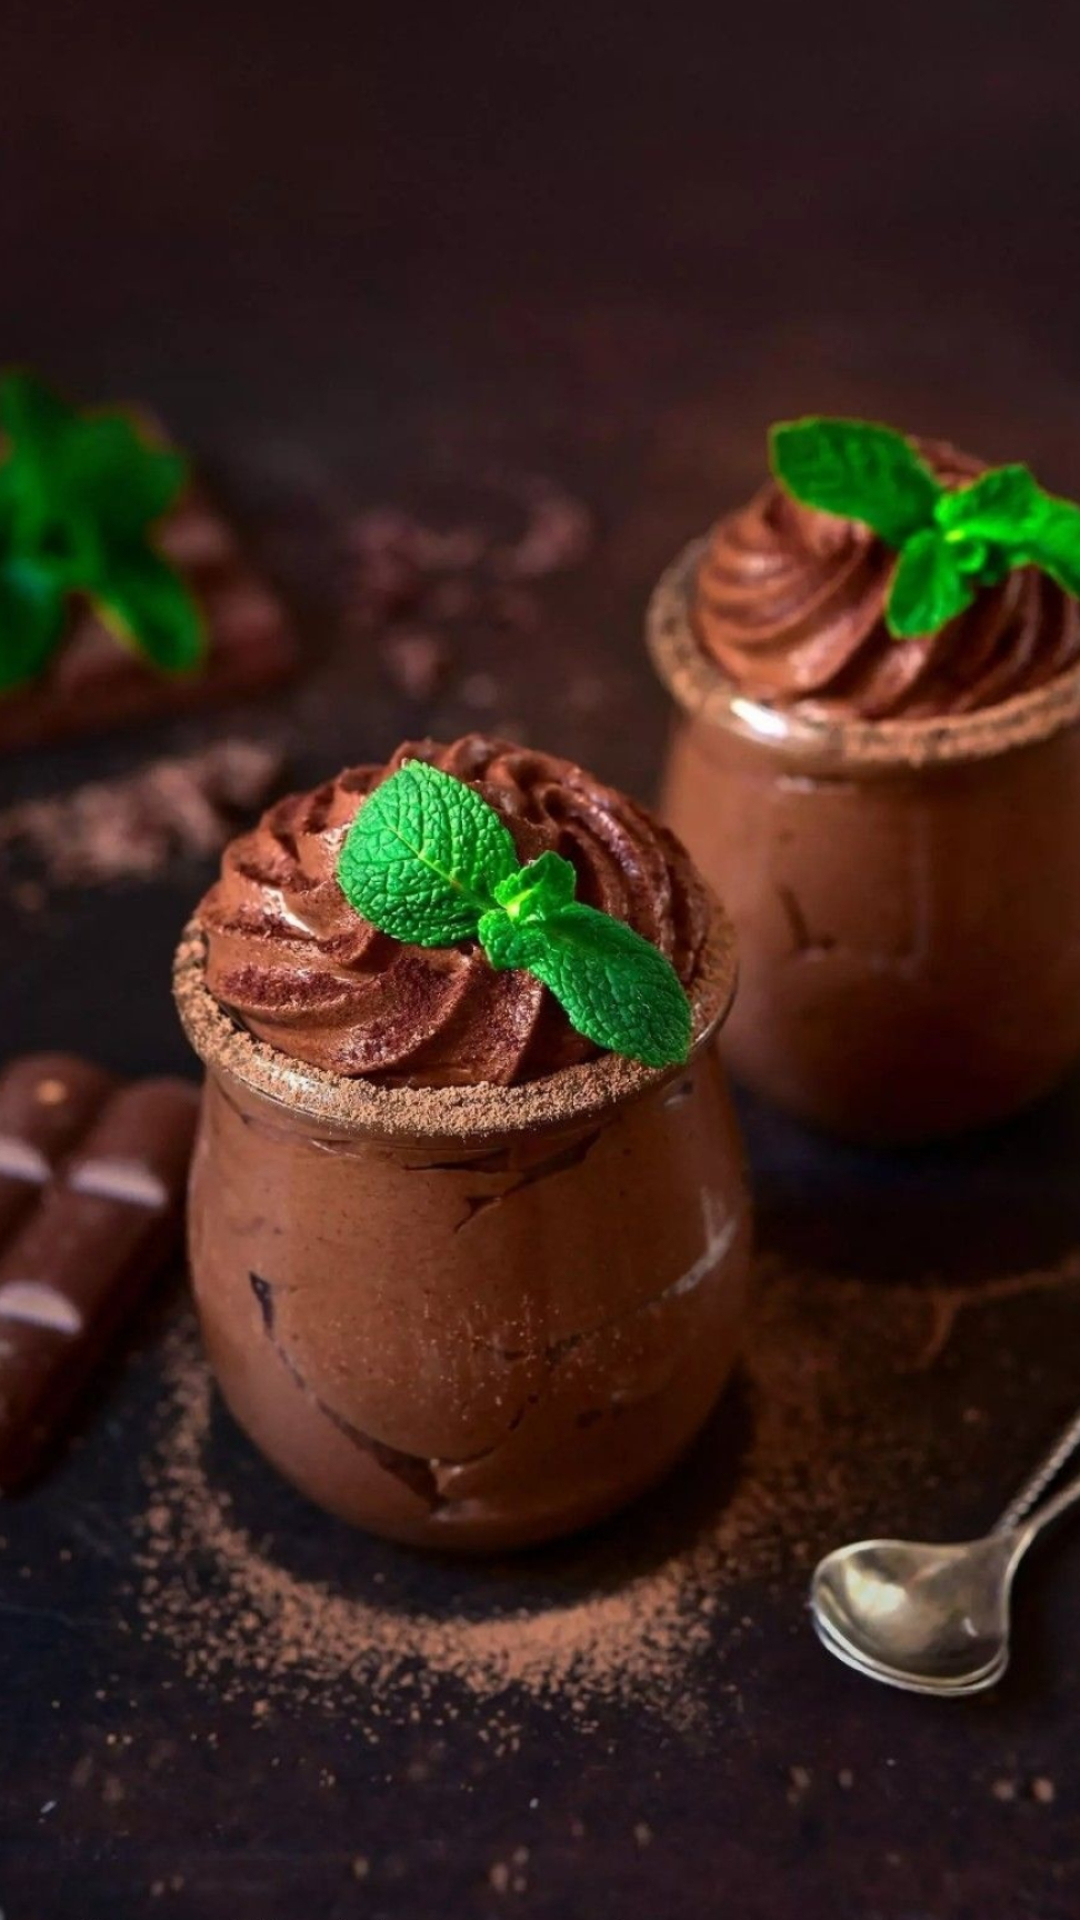 Decadent chocolate pudding, Mouthwatering delight, Irresistible cravings, Tempting dessert, 1080x1920 Full HD Phone